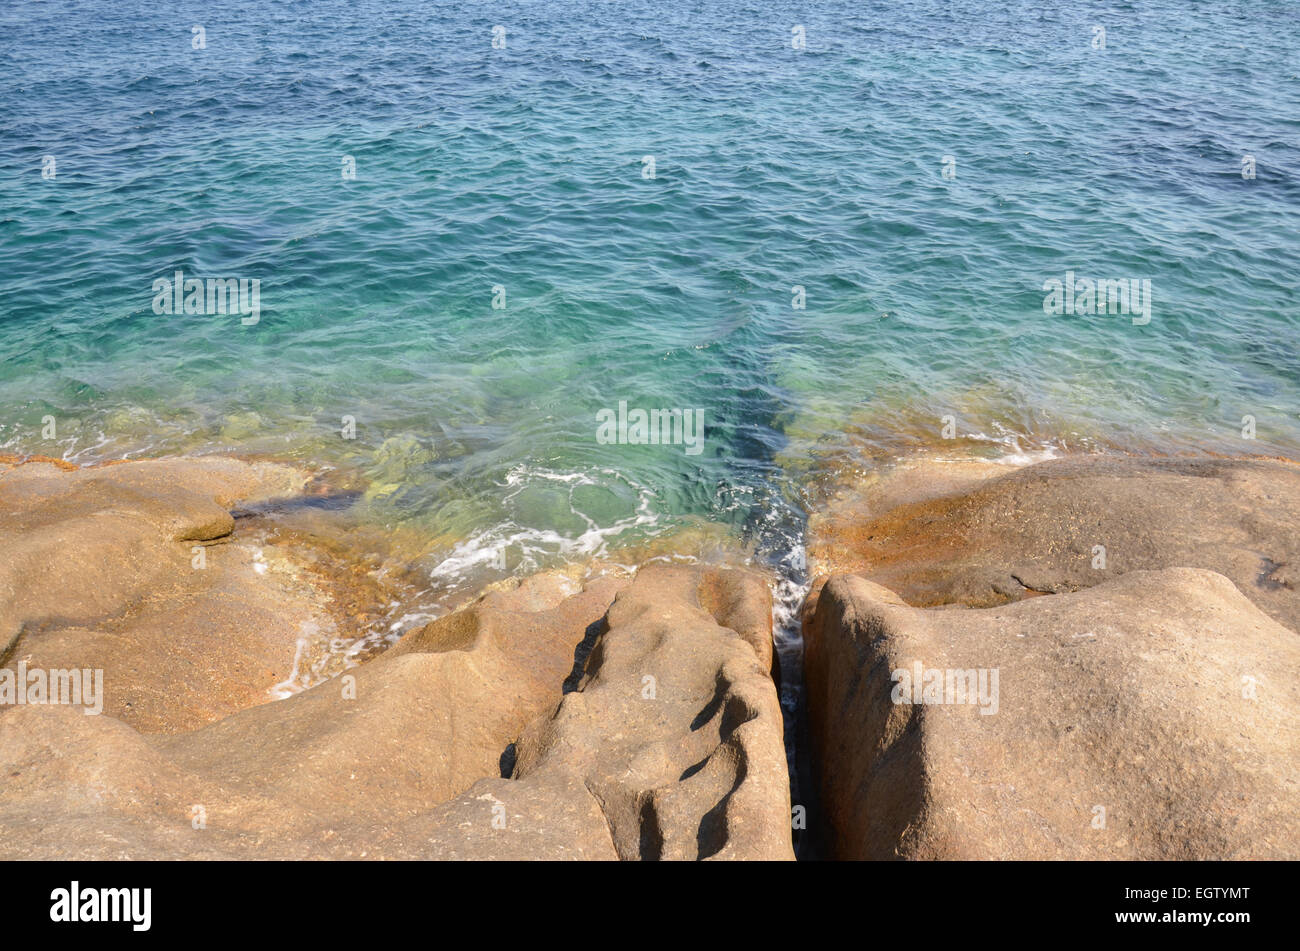 View of the cliffs and the sea of lily Stock Photo